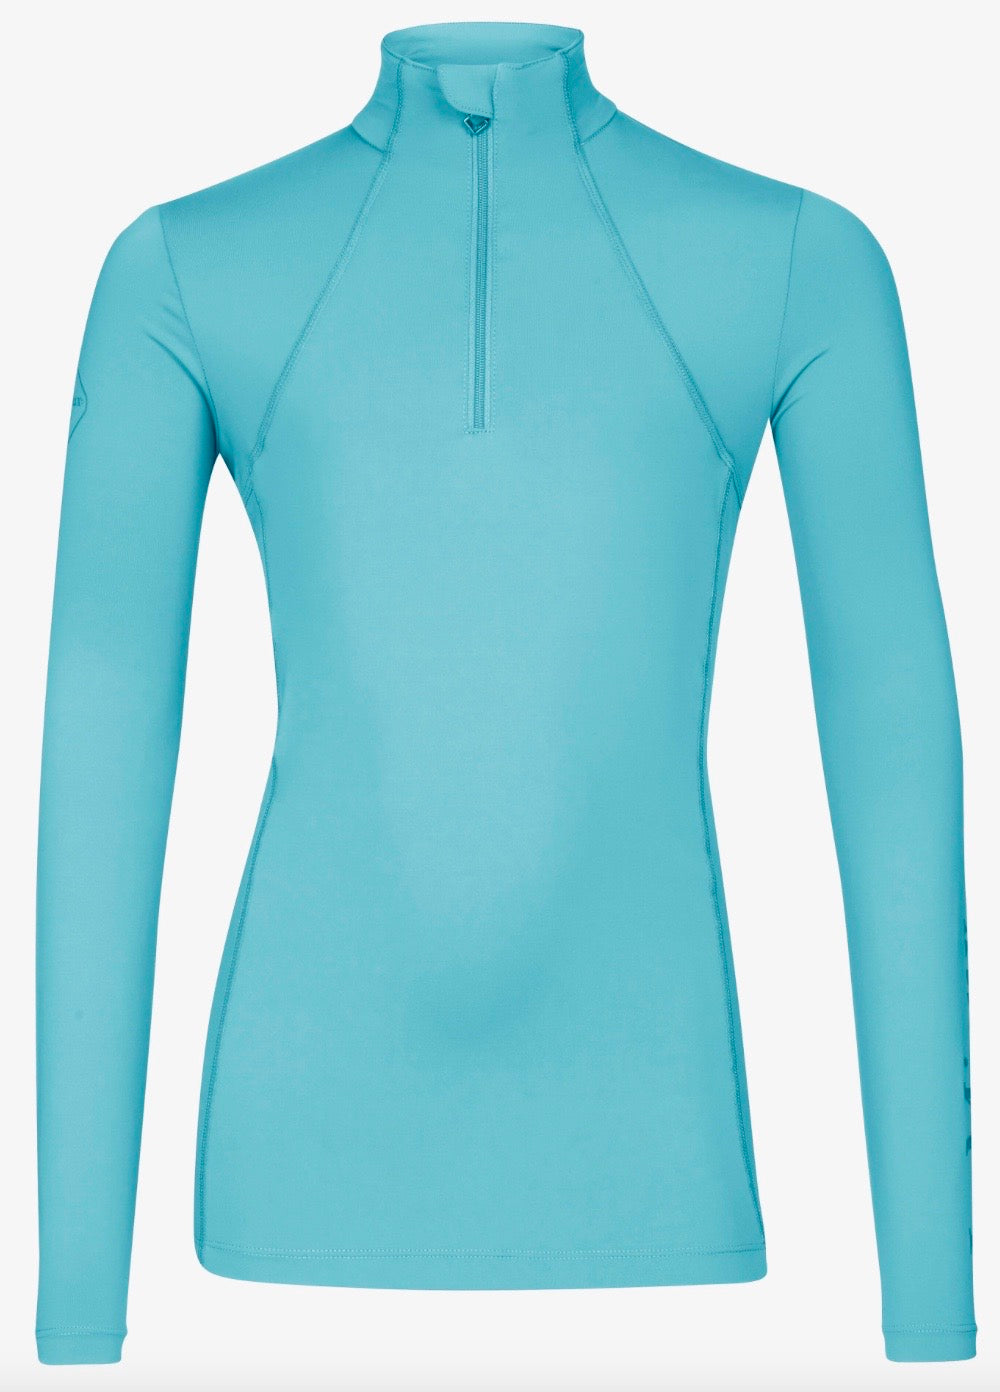 Le Mieux Young Rider Base Layer Azure